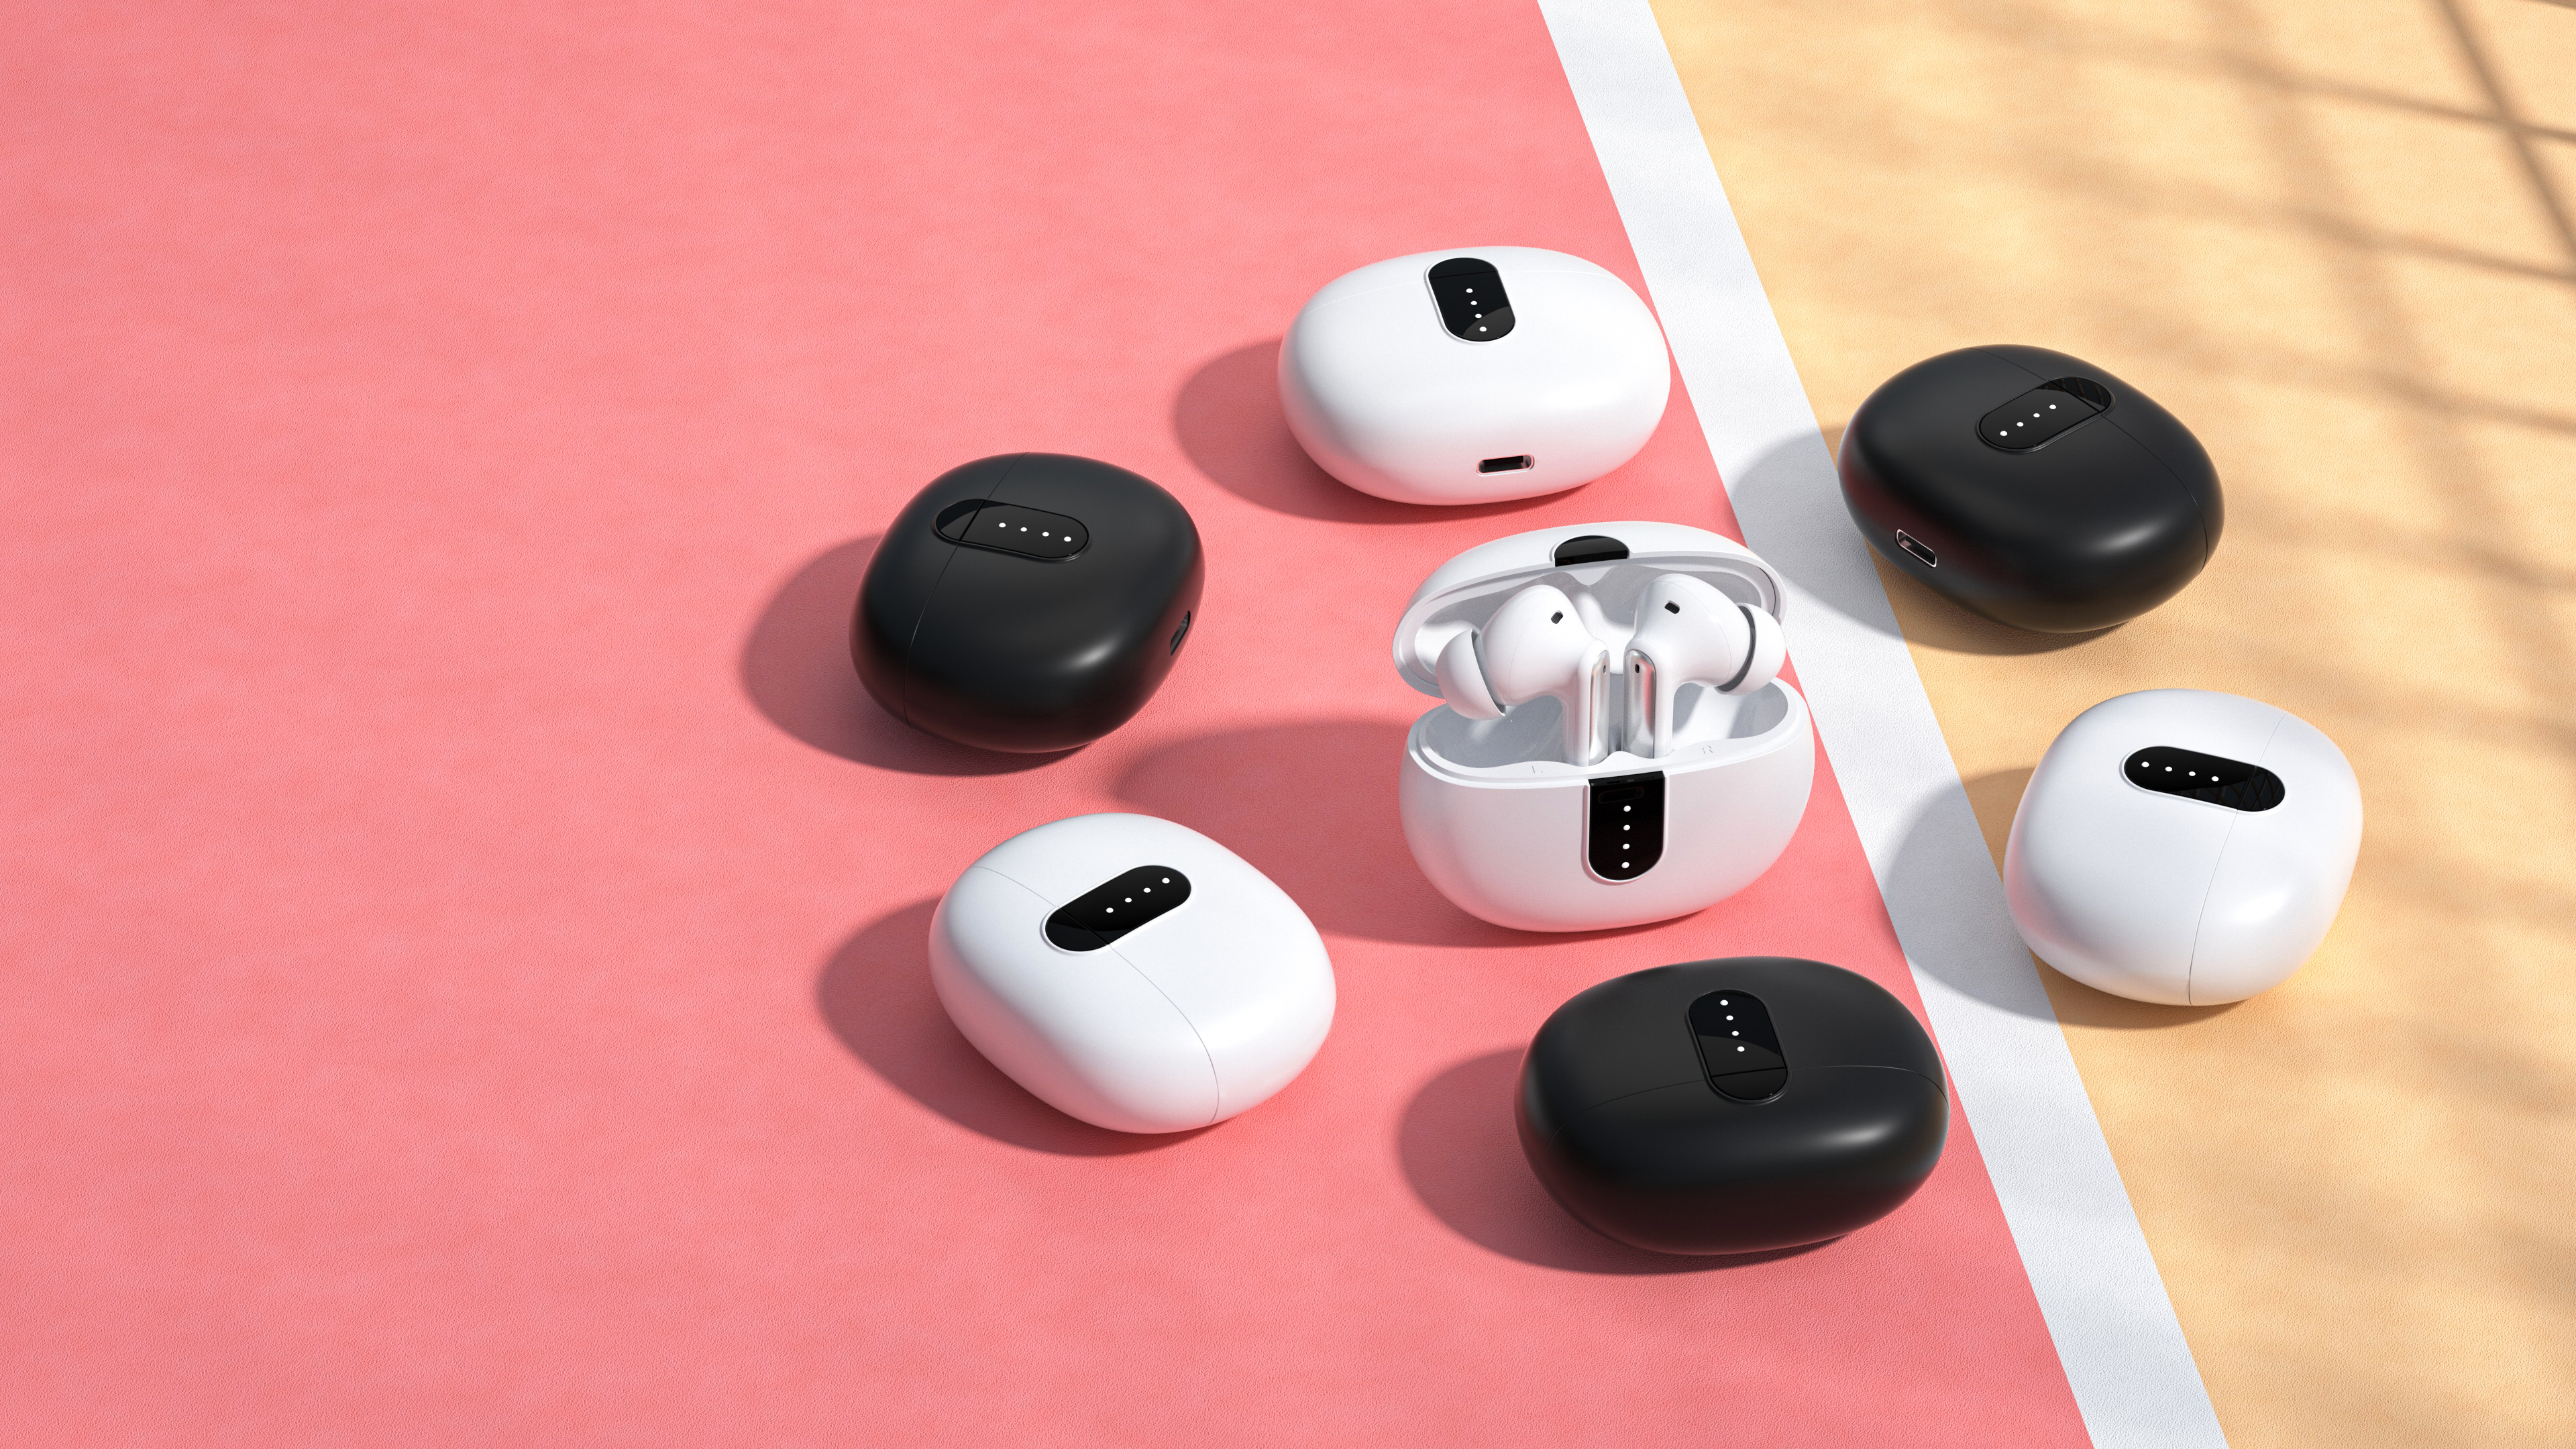 TWS earbuds with anc